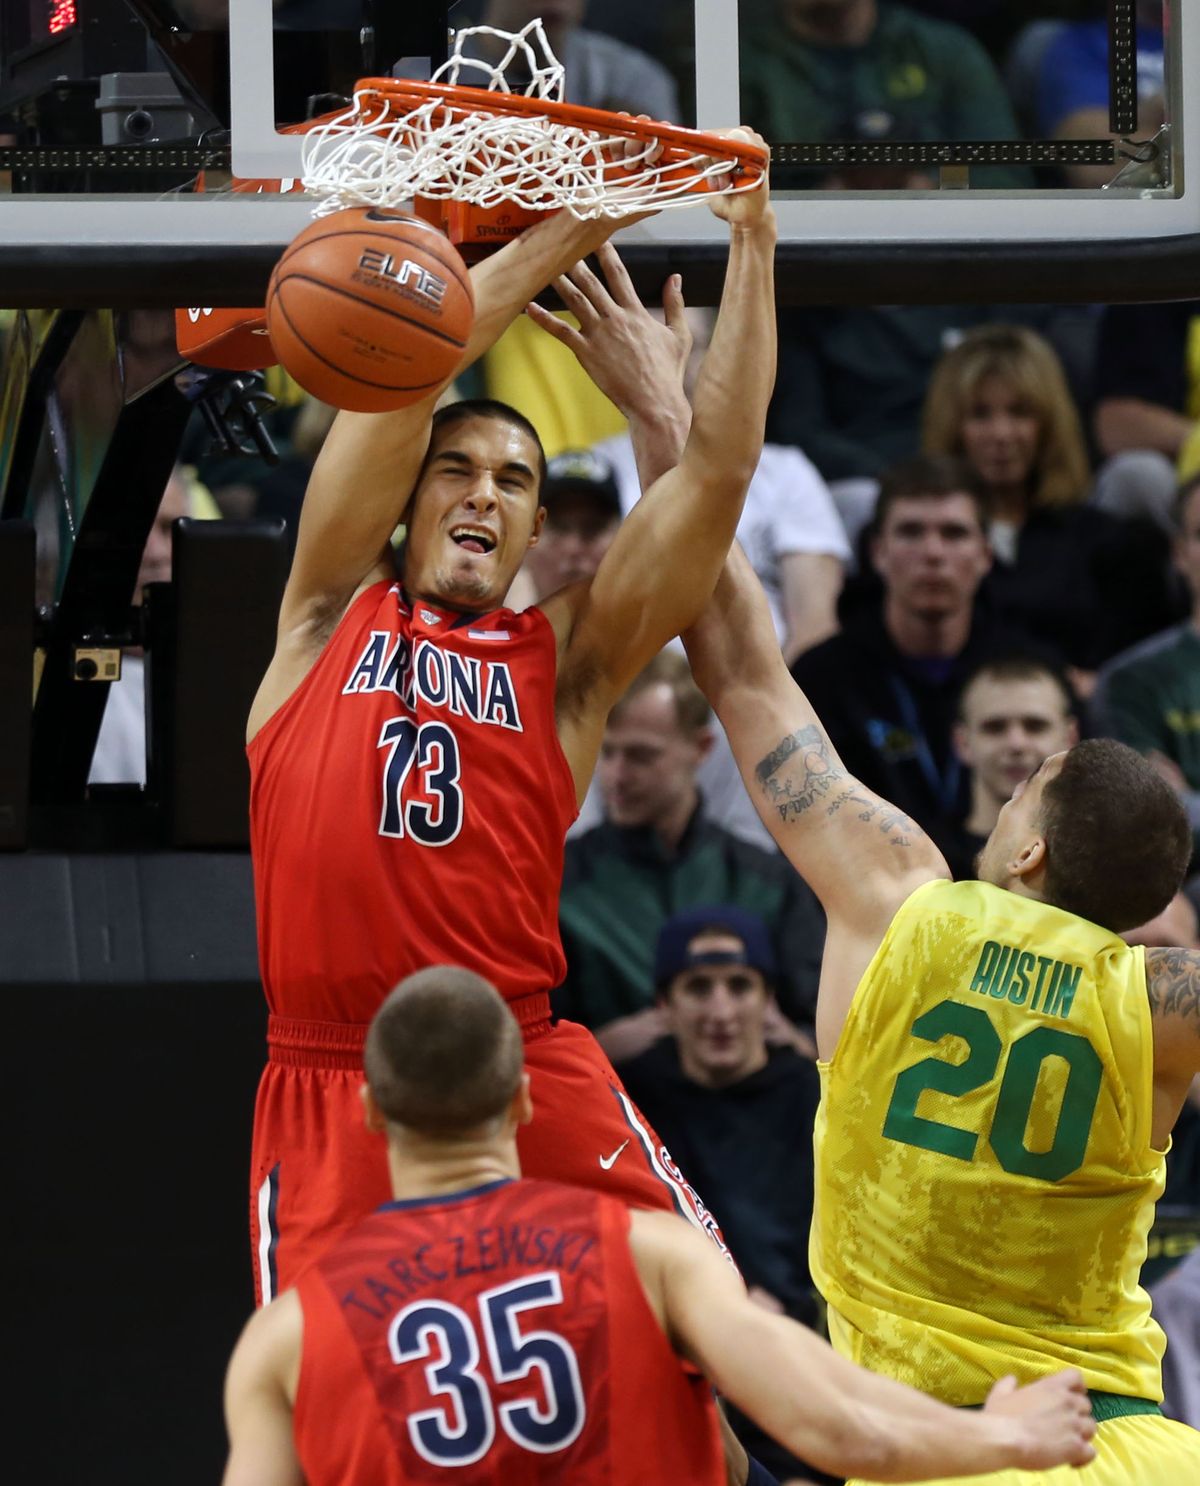 Arizona’s Nick Johnson (13) was named the Pac-12 Player of the Year. (Associated Press)